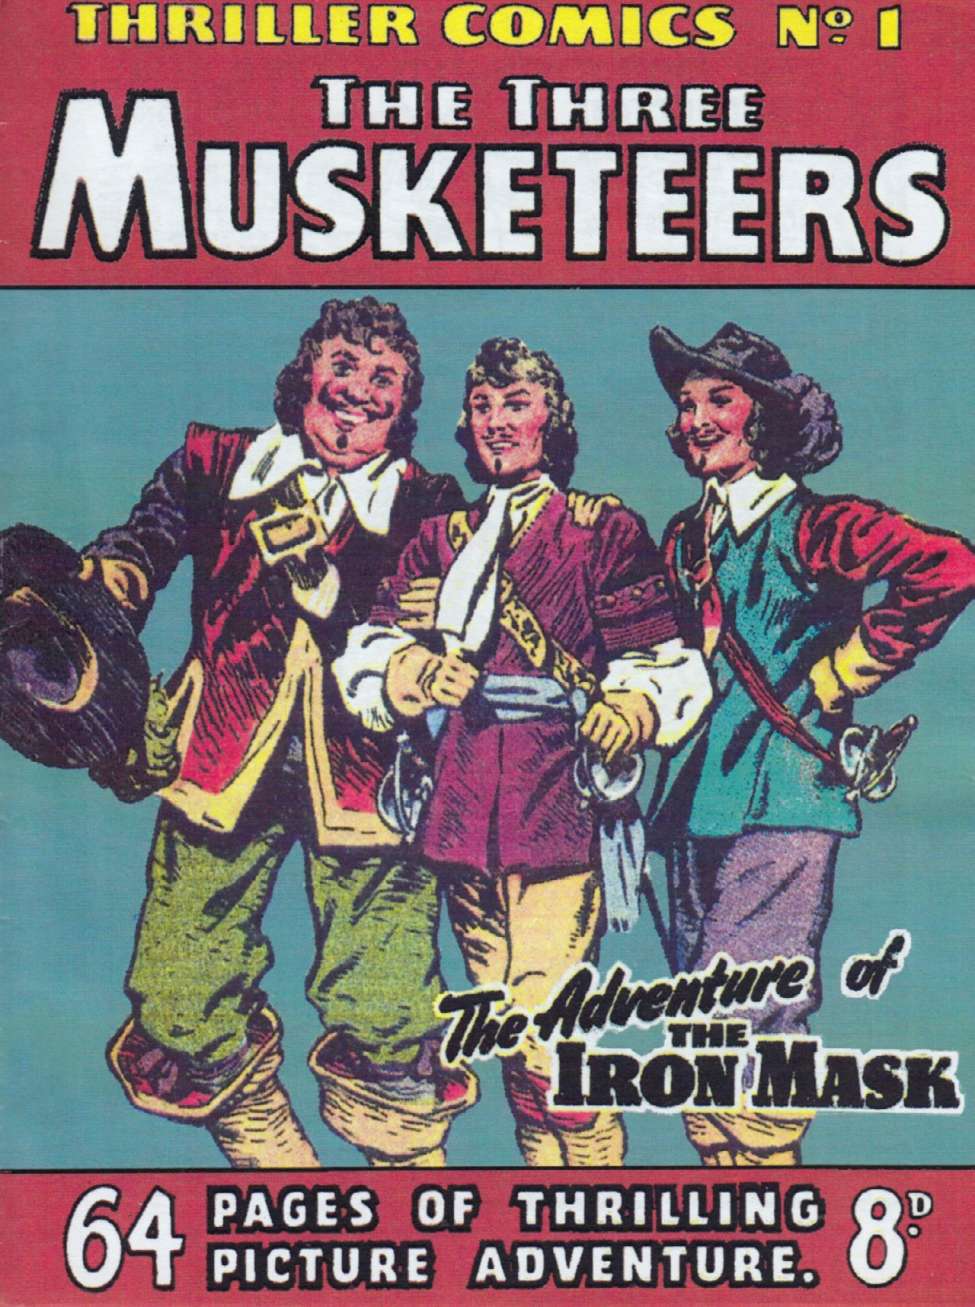 Book Cover For Thriller Comics 1 - The Three Musketeers